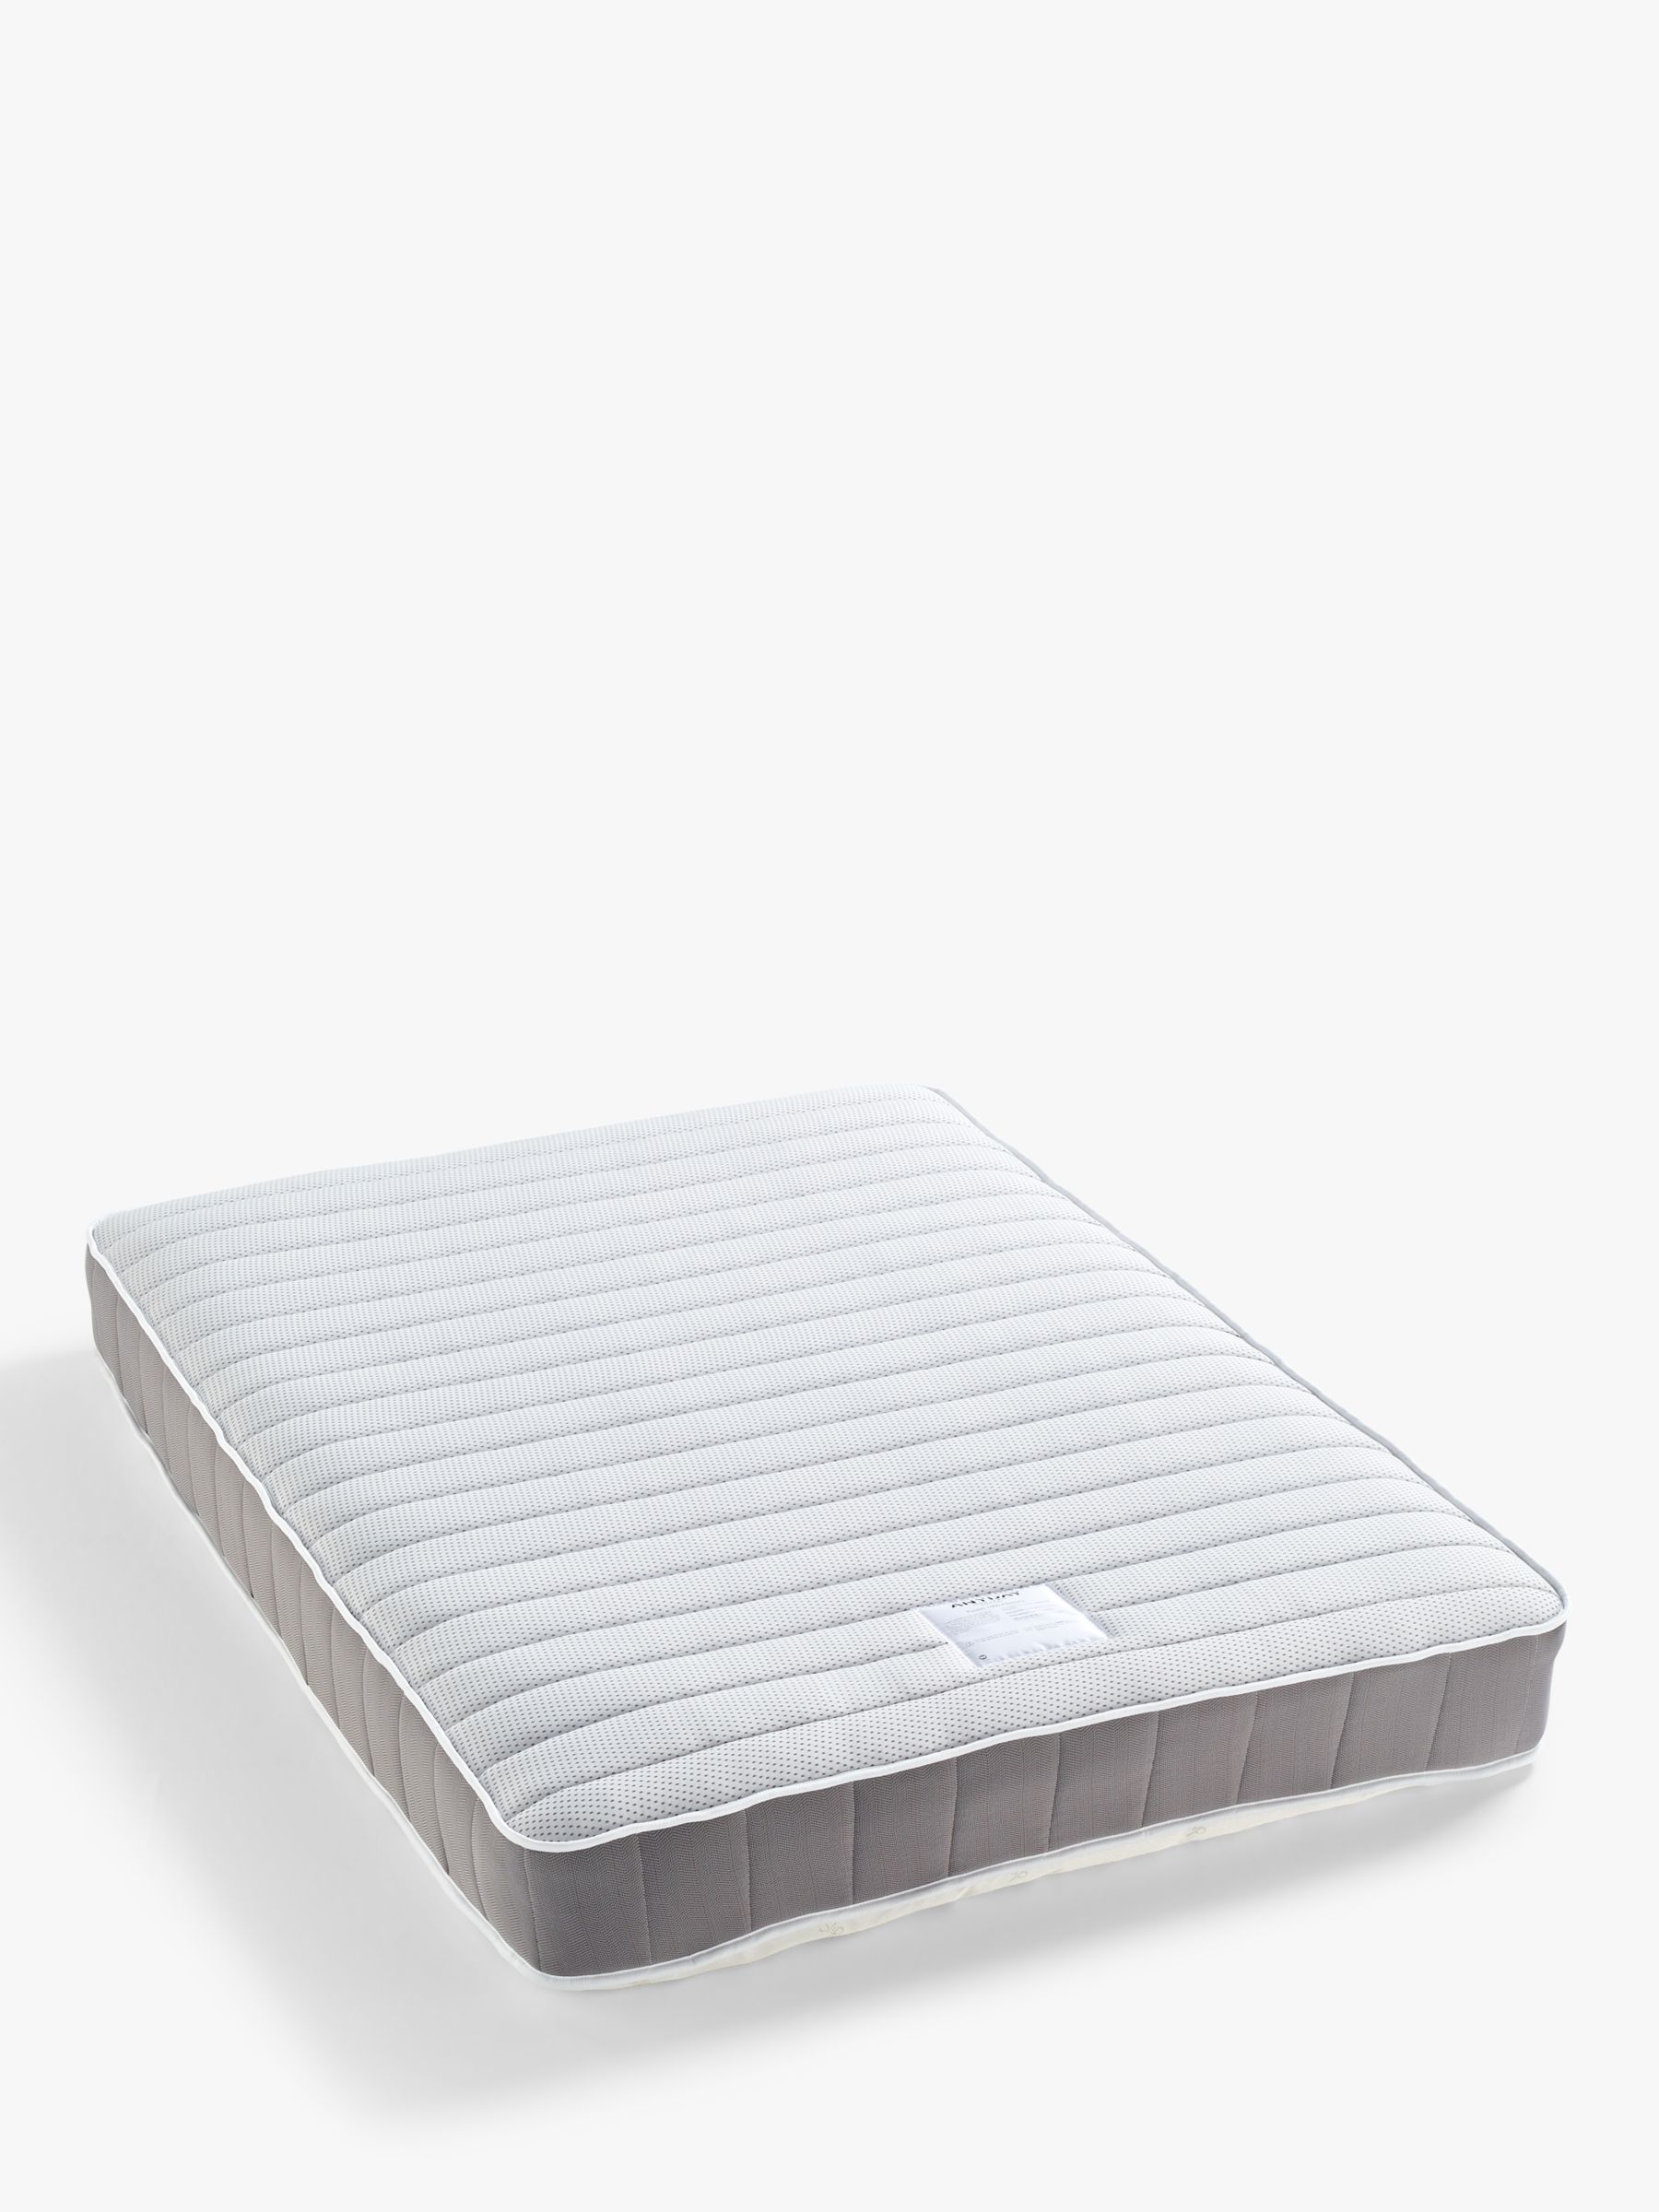 Photo of John lewis anyday pocket memory pocket spring rolled mattress medium tension double